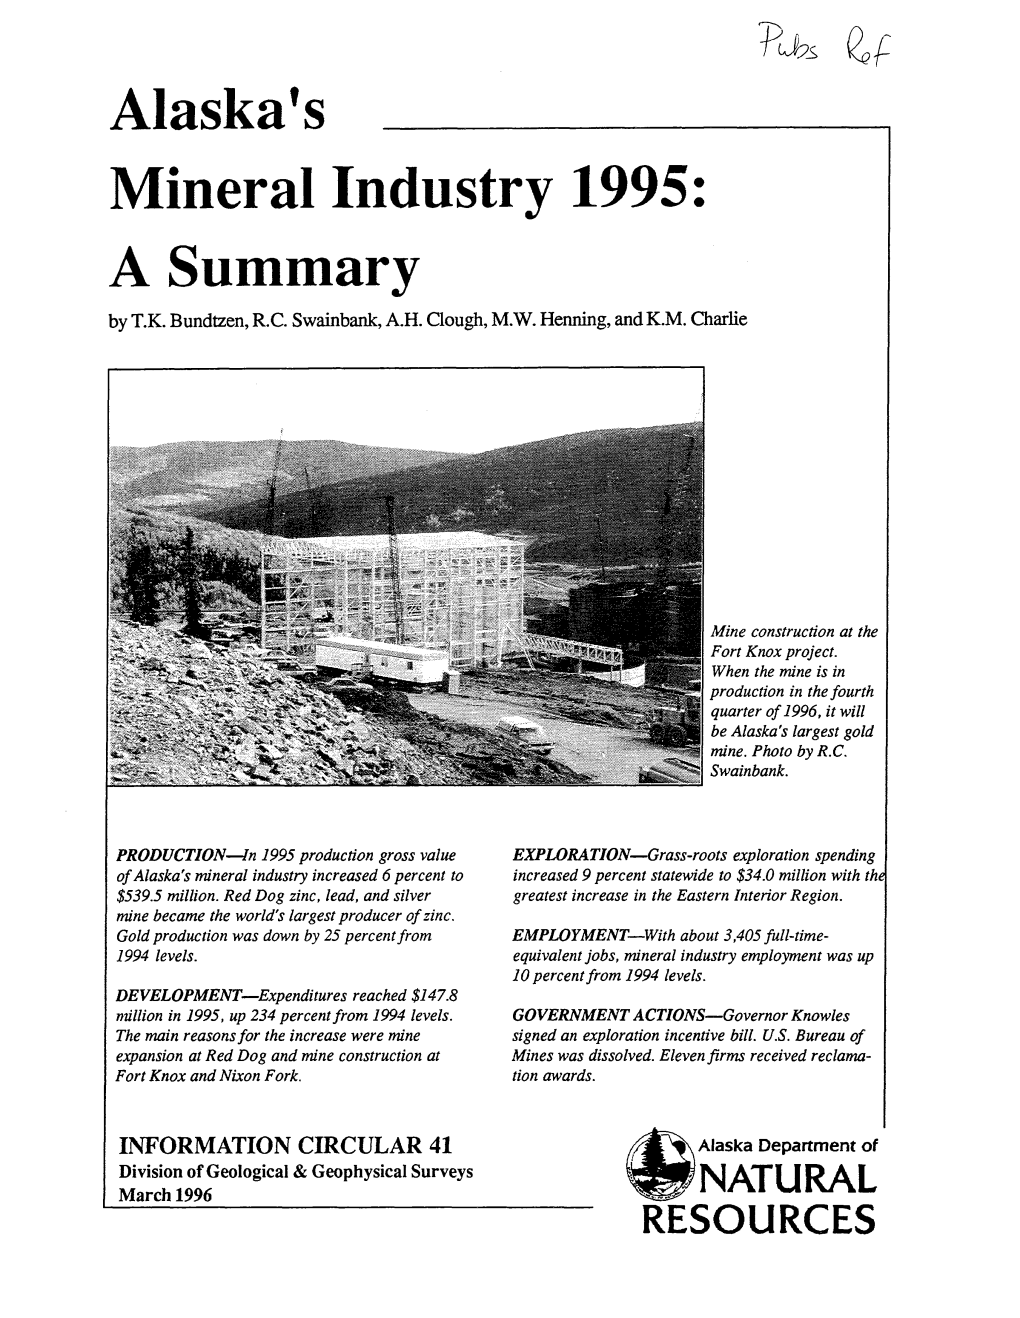 Alaska's Mineral Industry 1995: a Summary by T.K